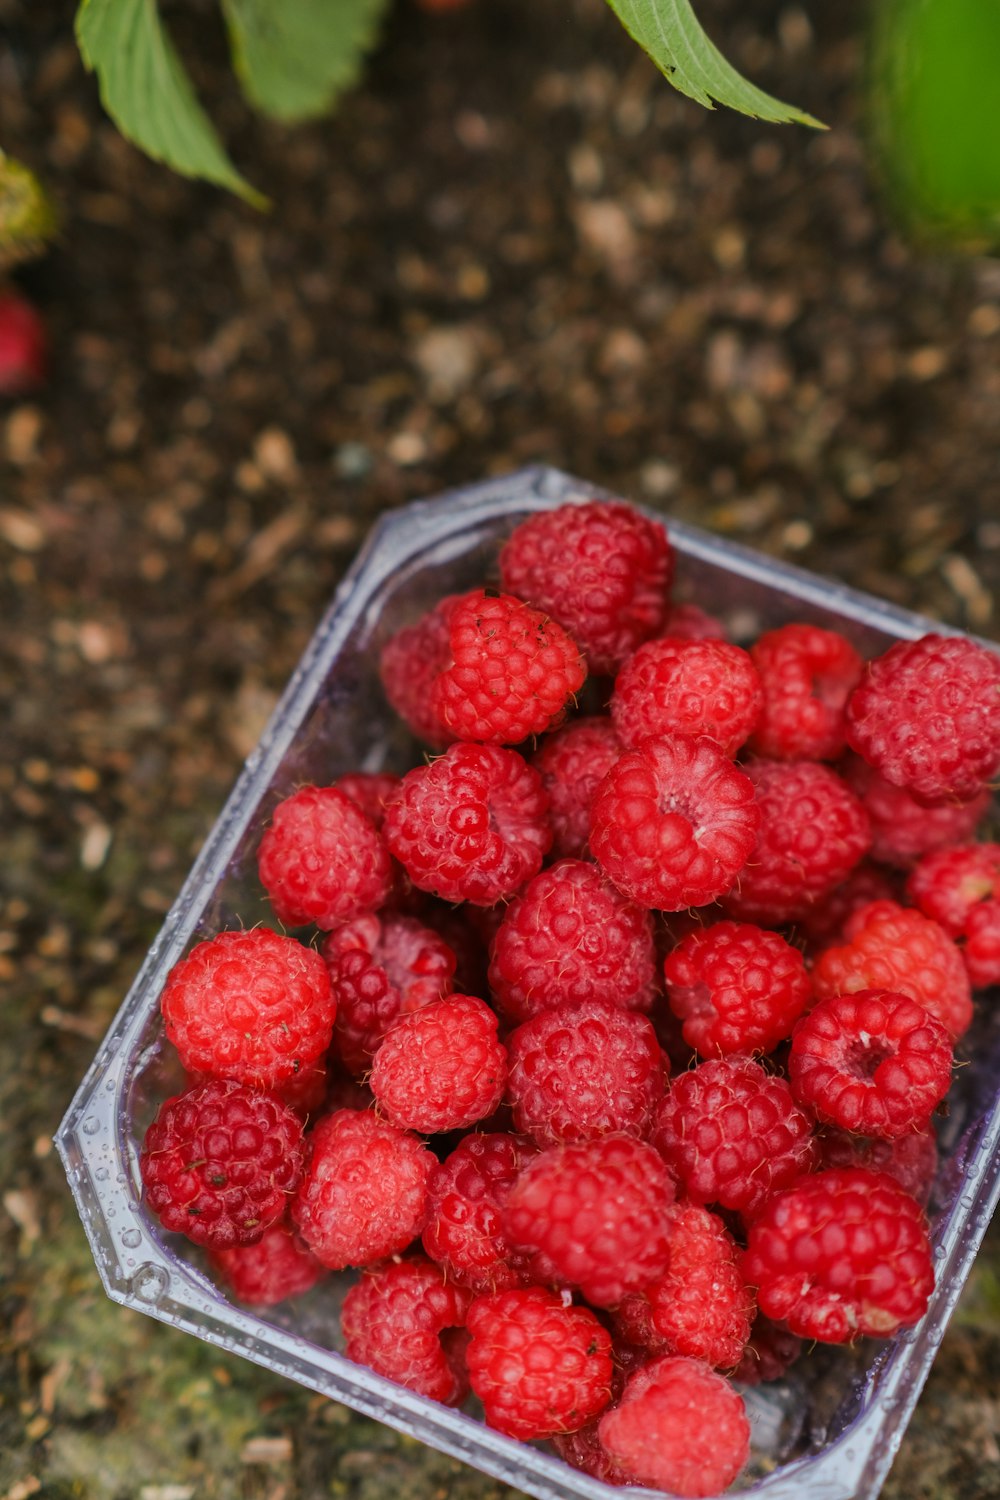 a plastic container filled with raspberries on the ground